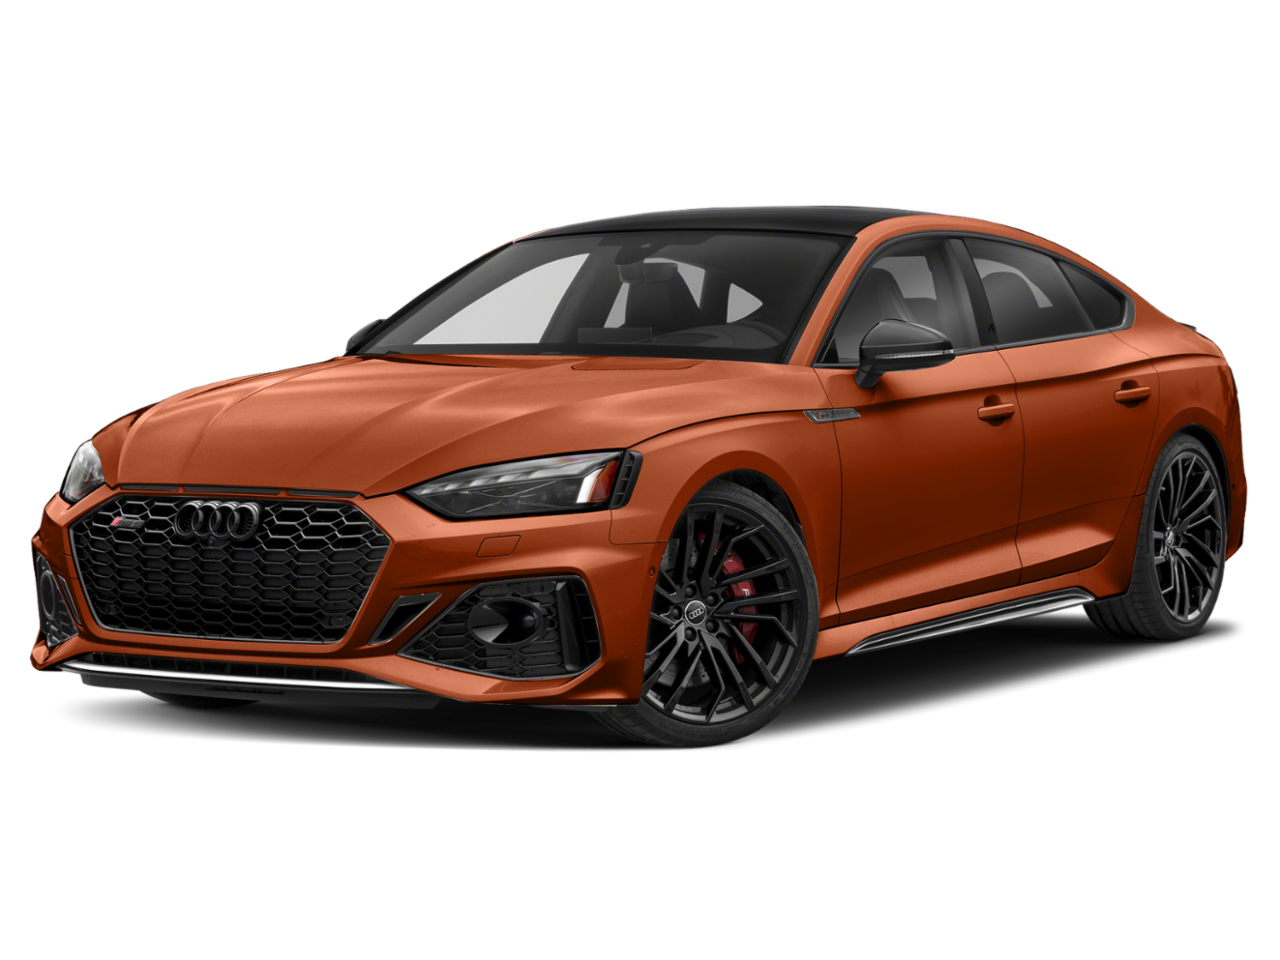 New Audi RS 5 Sportback from your Appleton, WI dealership, Bergstrom